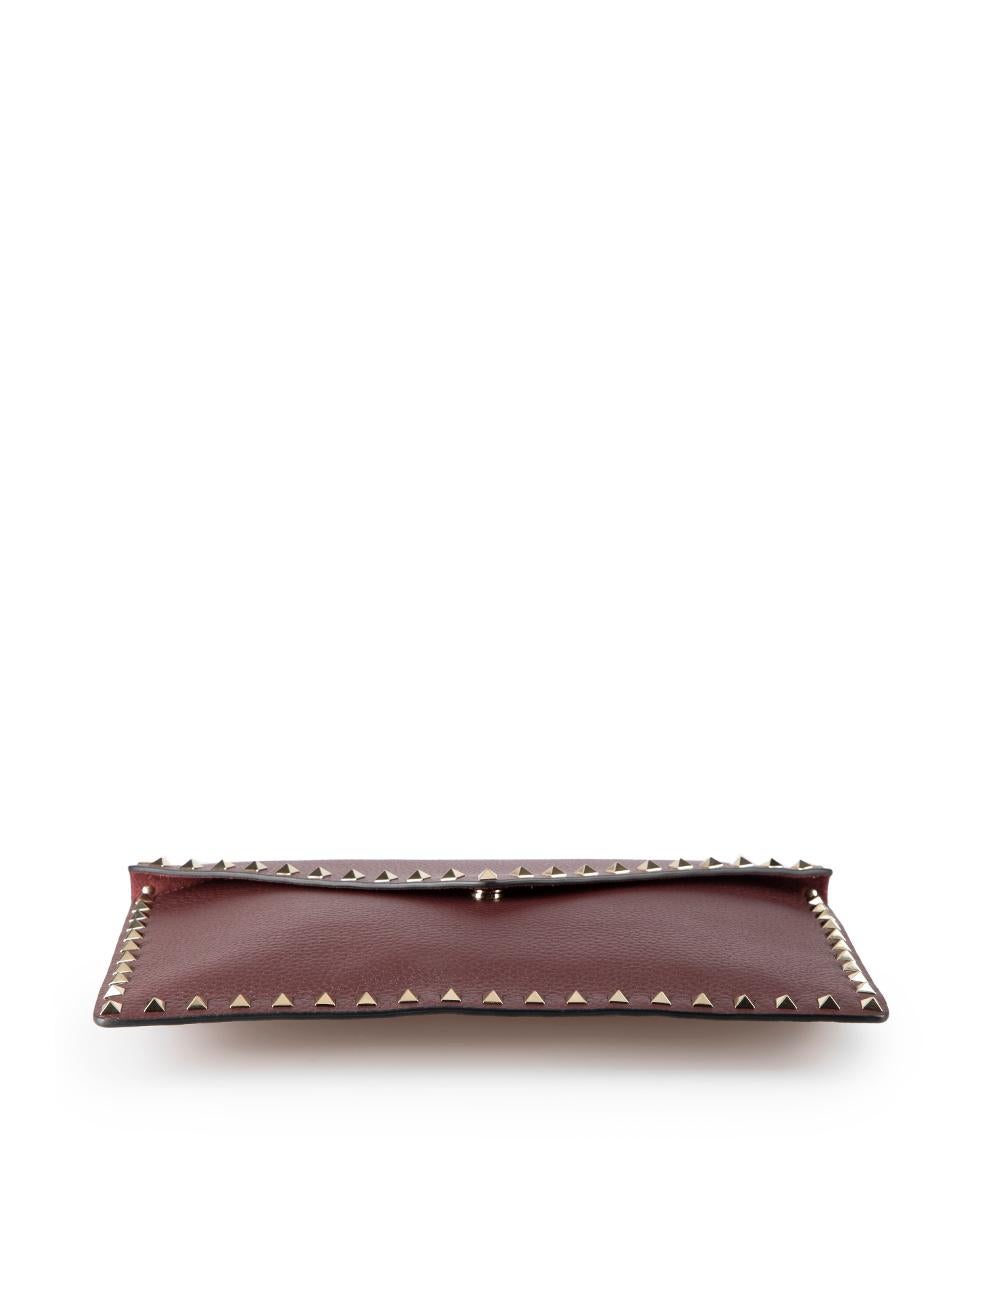 Valentino Women's Burgundy Grained Leather Studded Envelope Clutch 1